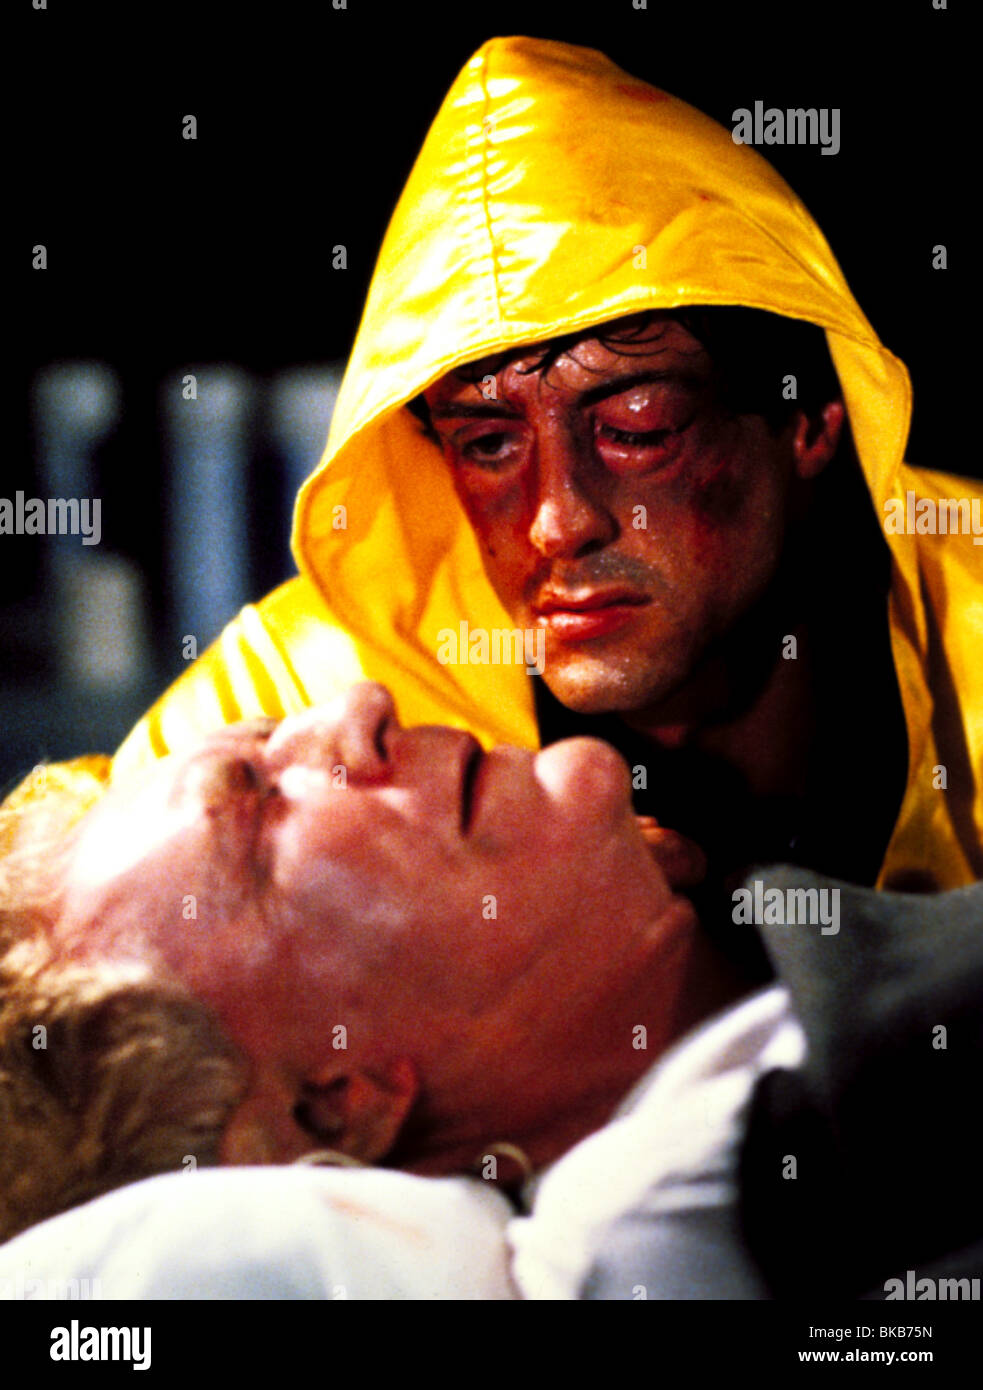 ROCKY III (1982) BURGESS MEREDITH, SYLVESTER STALLONE RK3 002OS Stock Photo